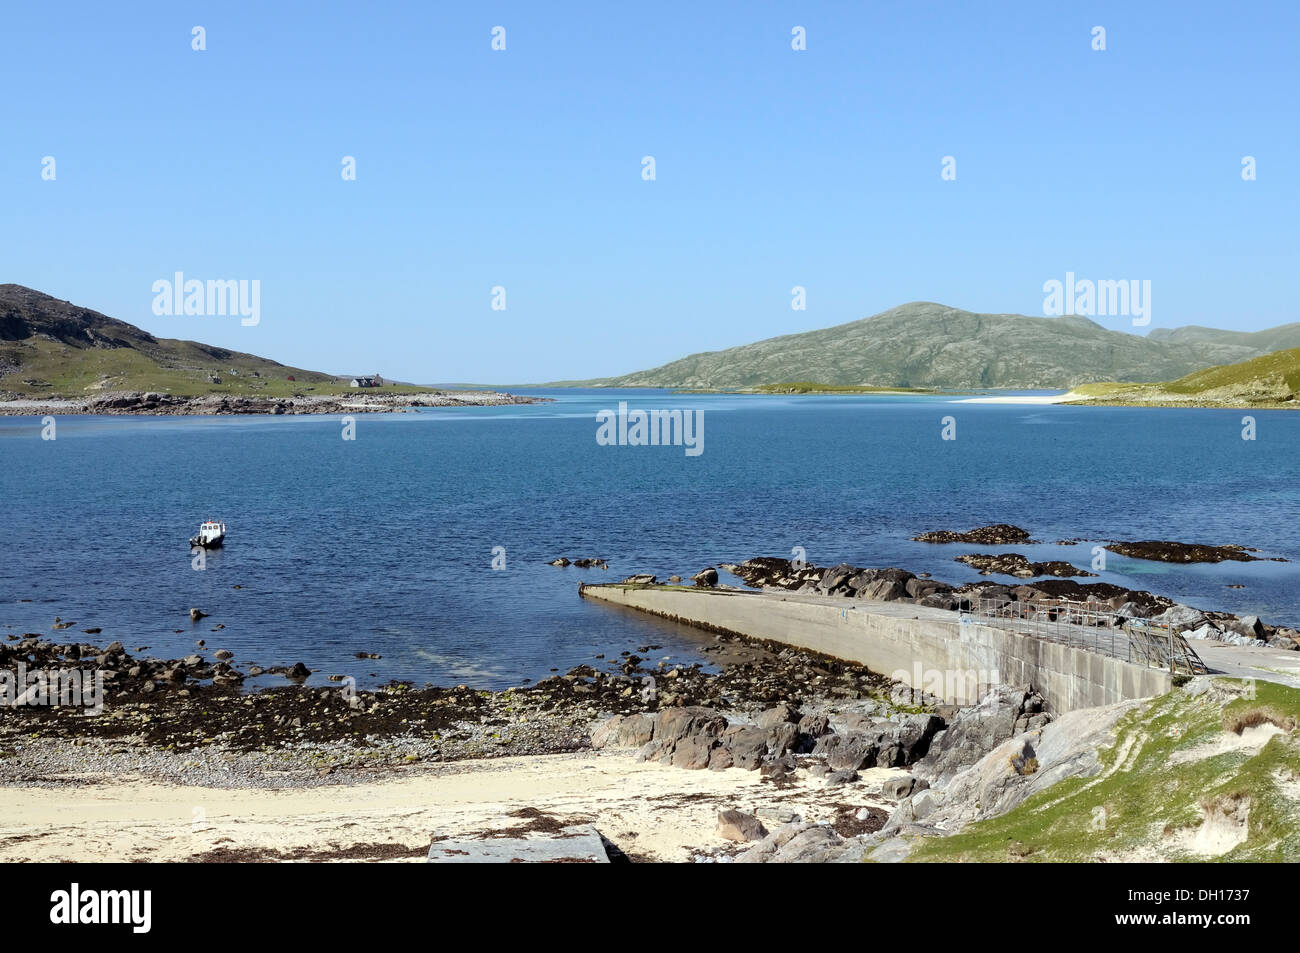 Boat, slipway and beach at Hushinish with view over to Scarp Stock Photo